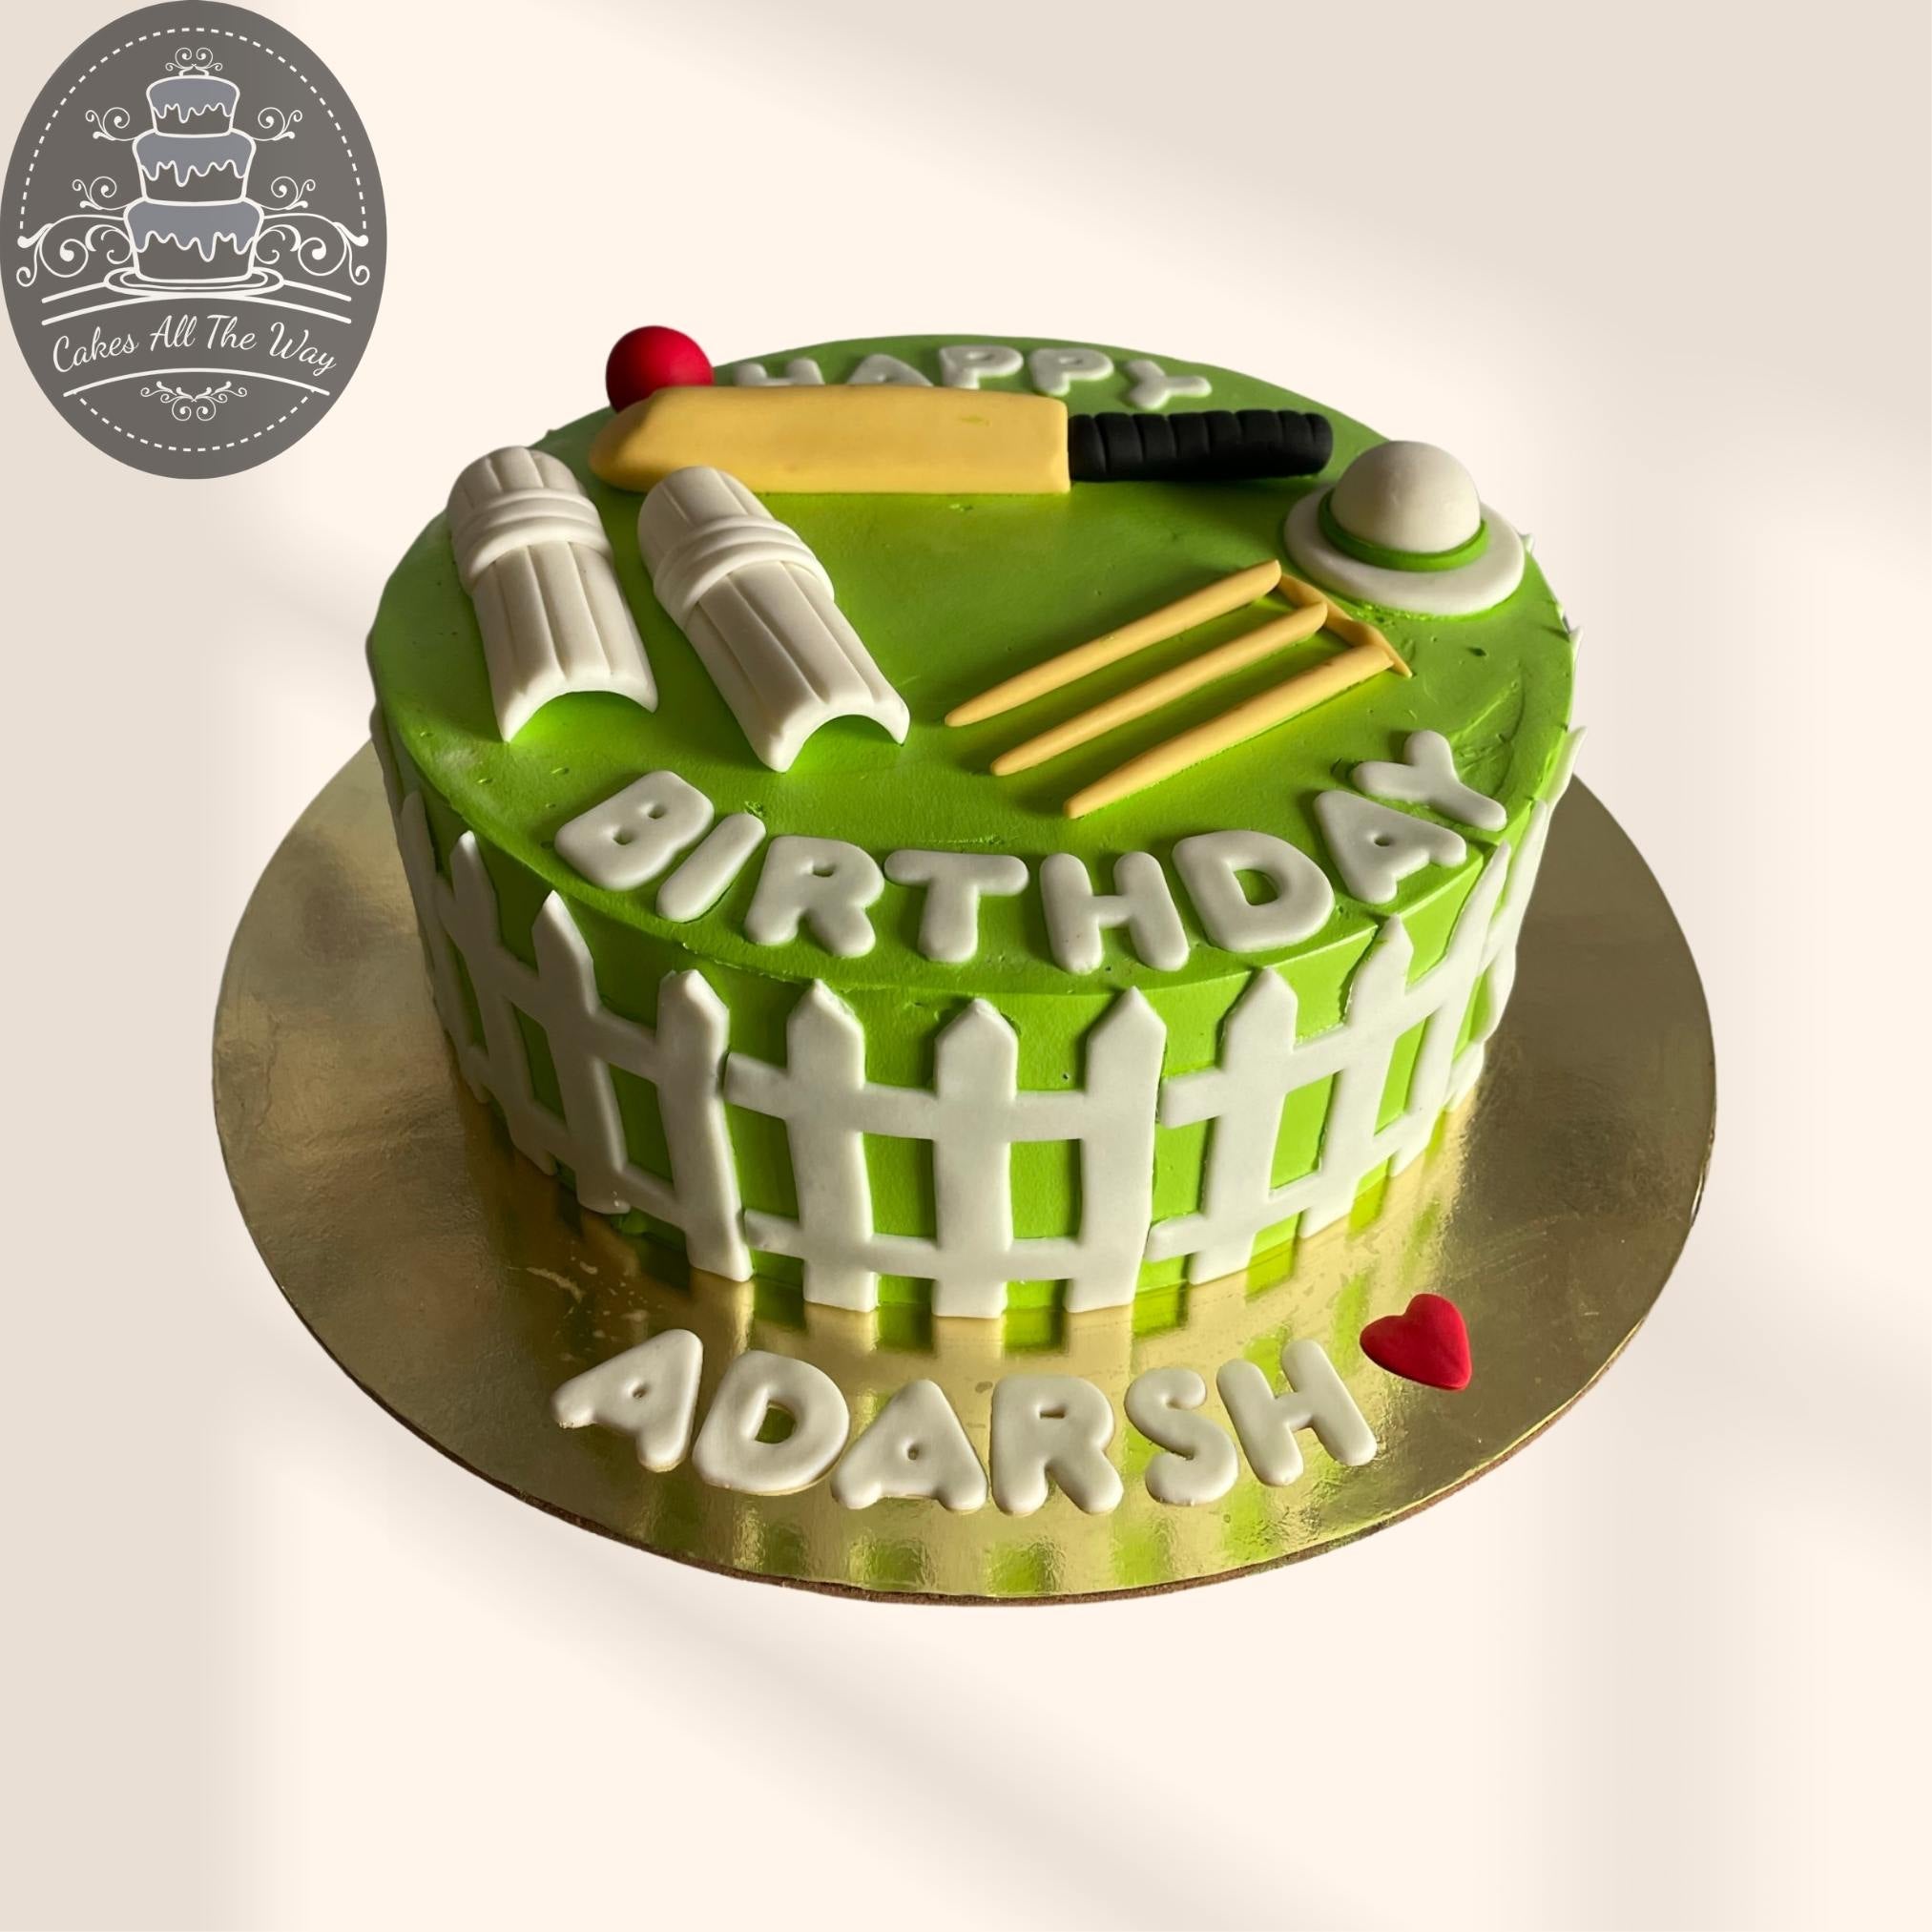 Cricket Theme Fondant Cake Delivery in Delhi NCR - ₹2,349.00 Cake Express